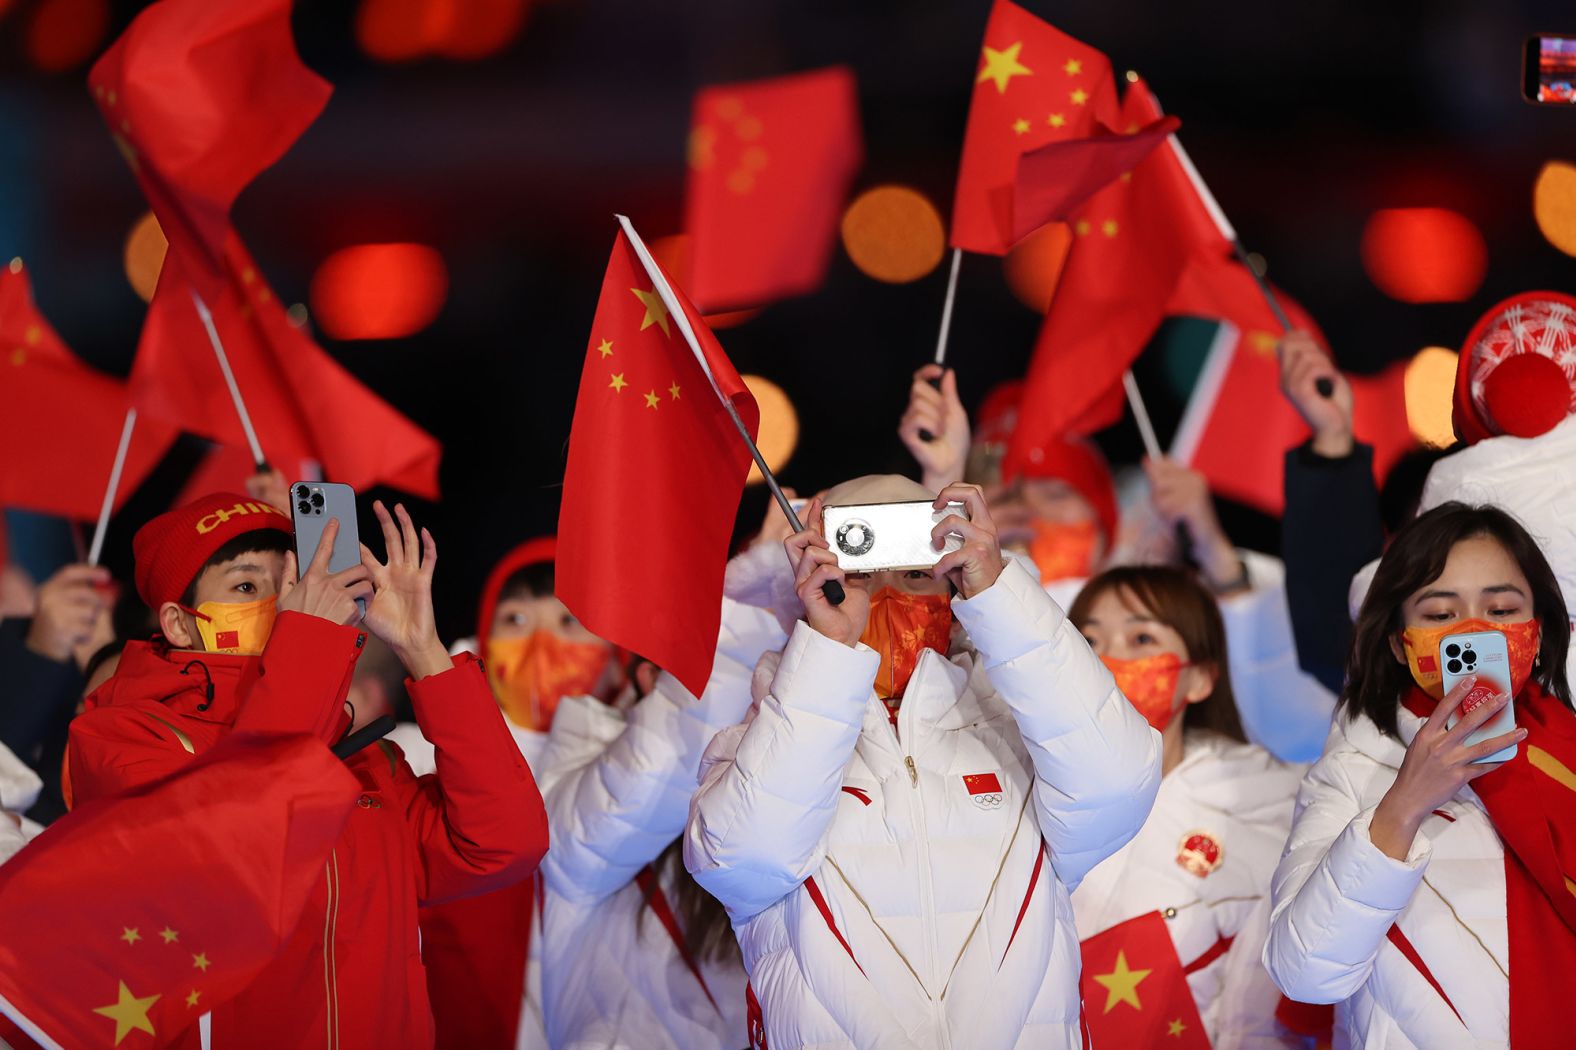 Chinese athletes take photos while taking part in the ceremony.